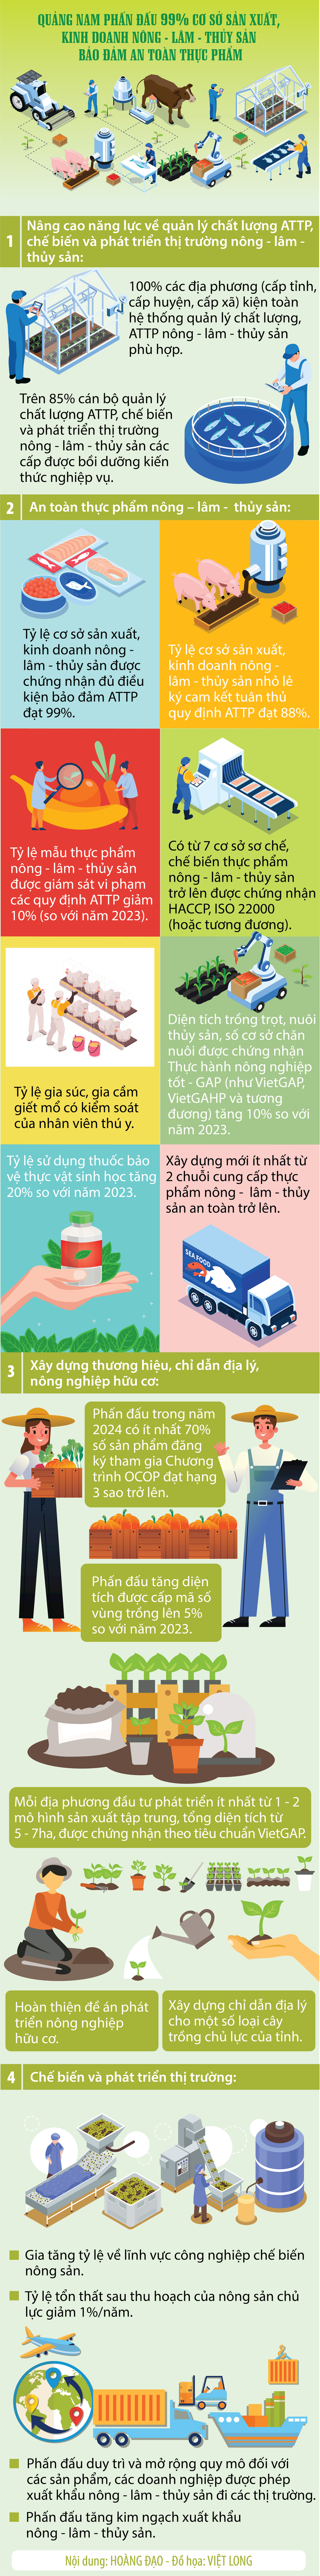 info-nong-lam-thuy-san.png